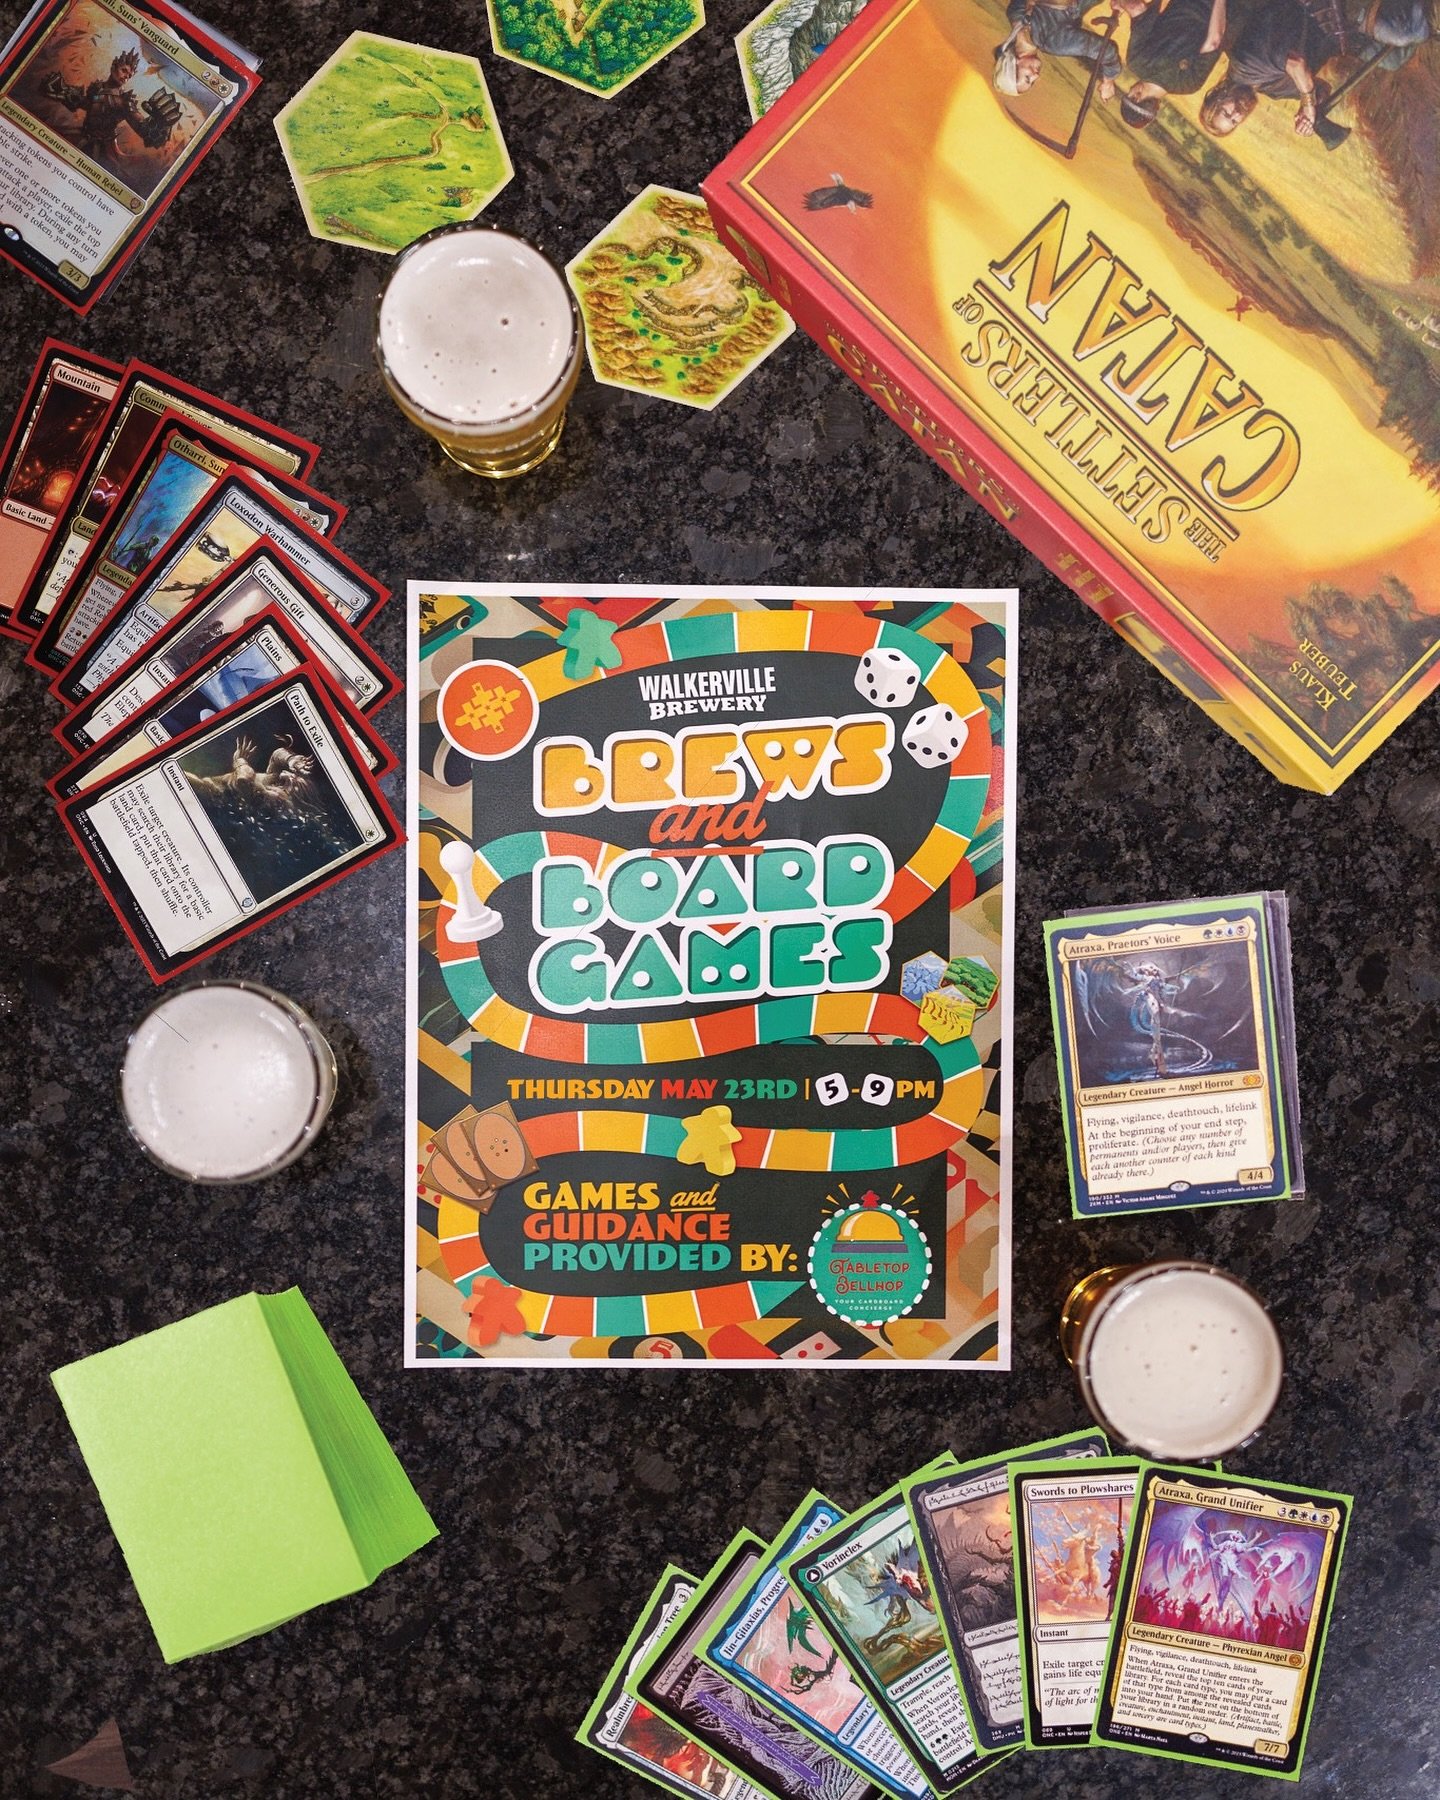 Brews and Board Games is BACK with your host @tabletopbellhop! 🎲♟️

Gather your friends and meet us at the brewery on Thursday, May 23rd from 5-9PM for a night filled with great beer and exciting board games.

Whether you&rsquo;re a seasoned board g